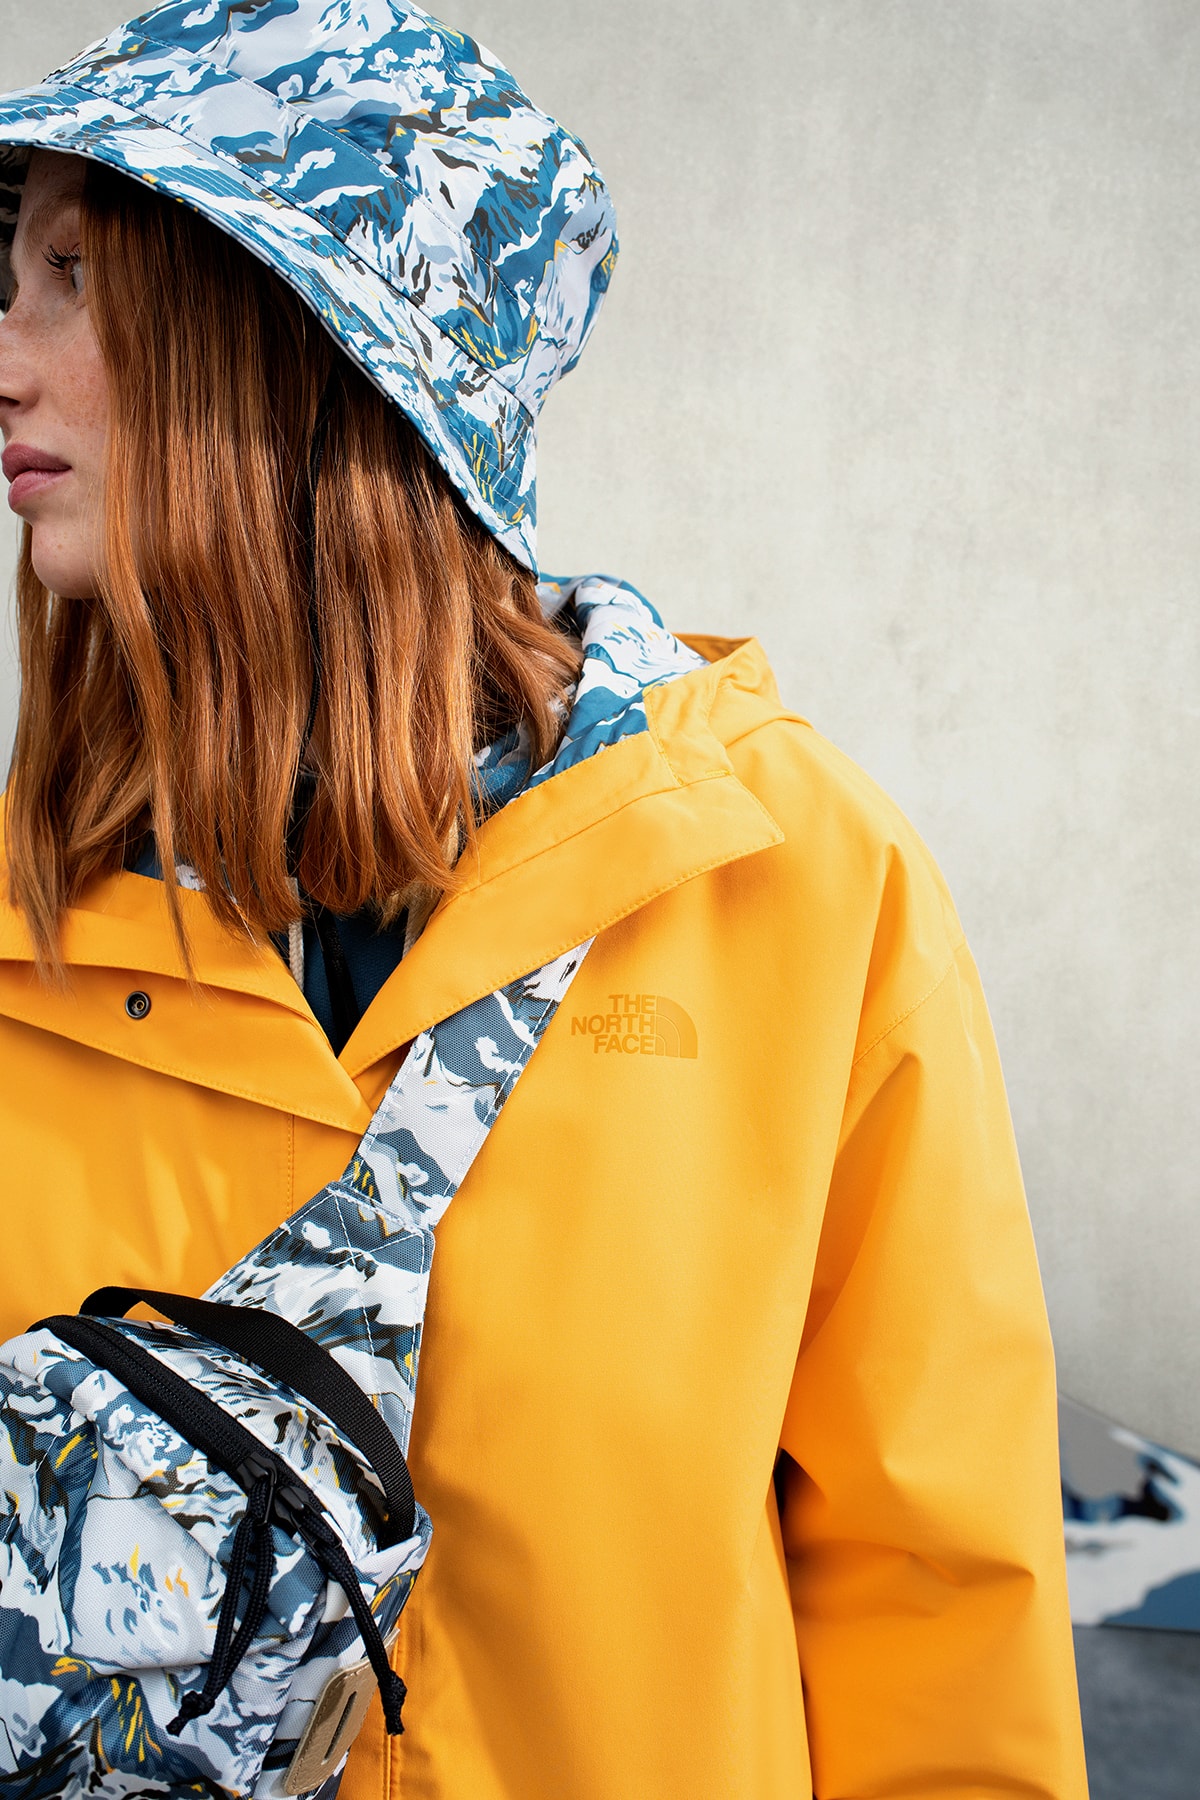 Liberty London x The North Face Collaboration Collection Puffer Jacket Sierra Down Outerwear